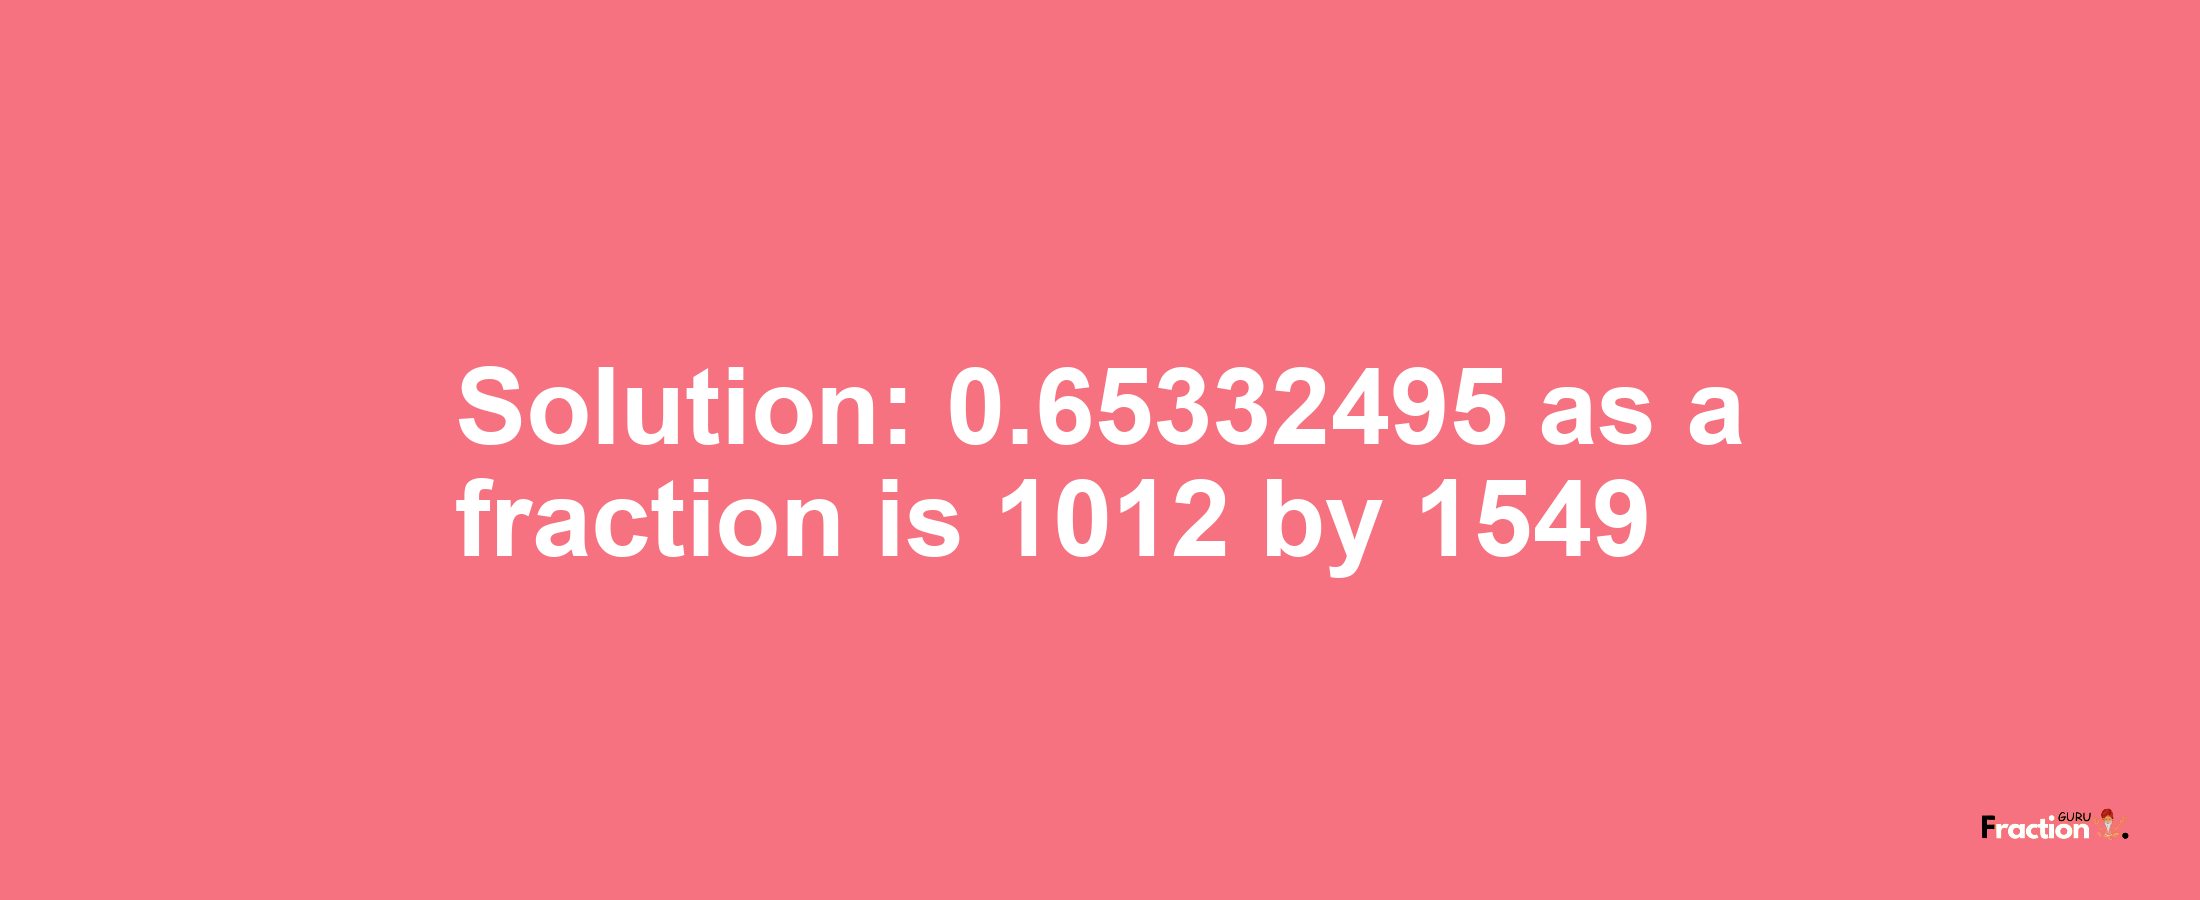 Solution:0.65332495 as a fraction is 1012/1549